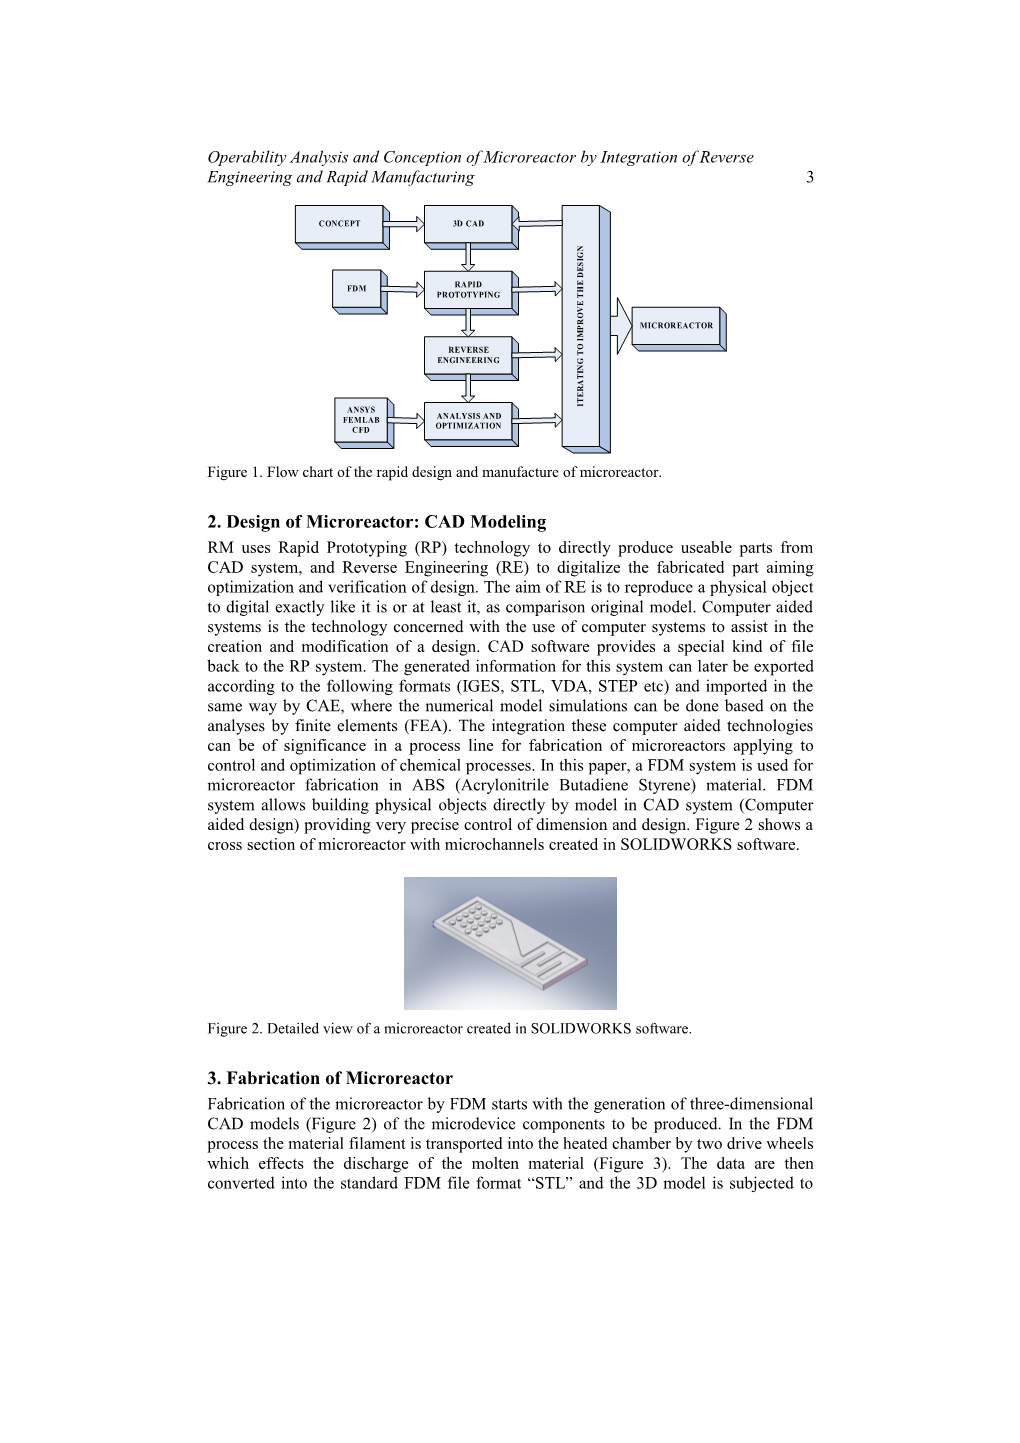 Operability Analysis and Conception of Microreactor by Integration of Reverse Engineering